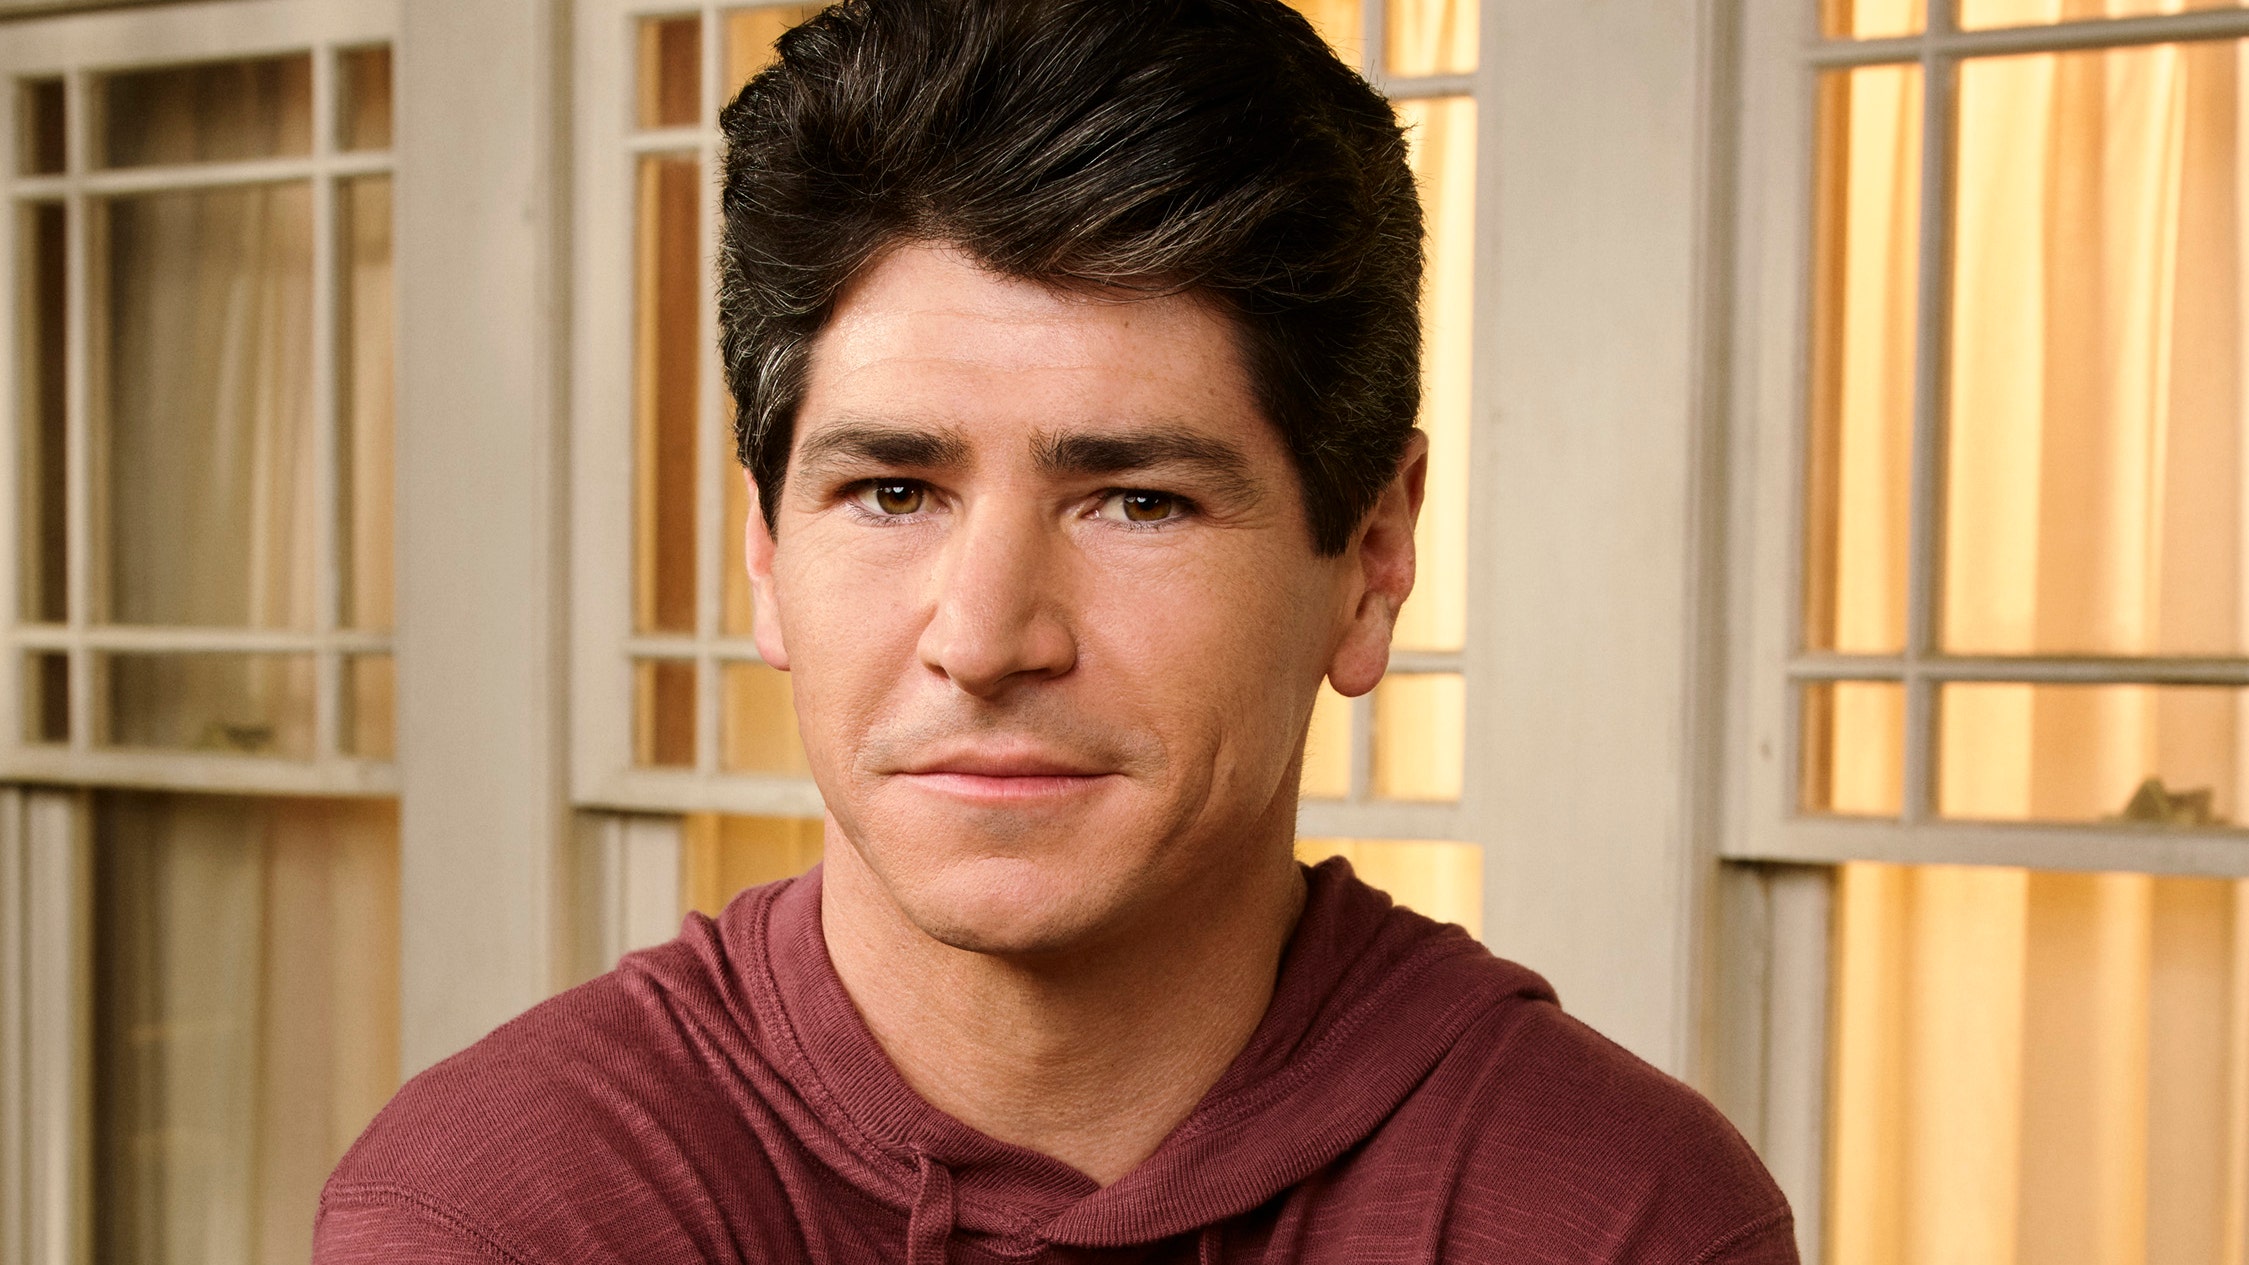 'The Conners' star Michael Fishman says he tries to bring 'strength and honor' to his veteran character - Fox News